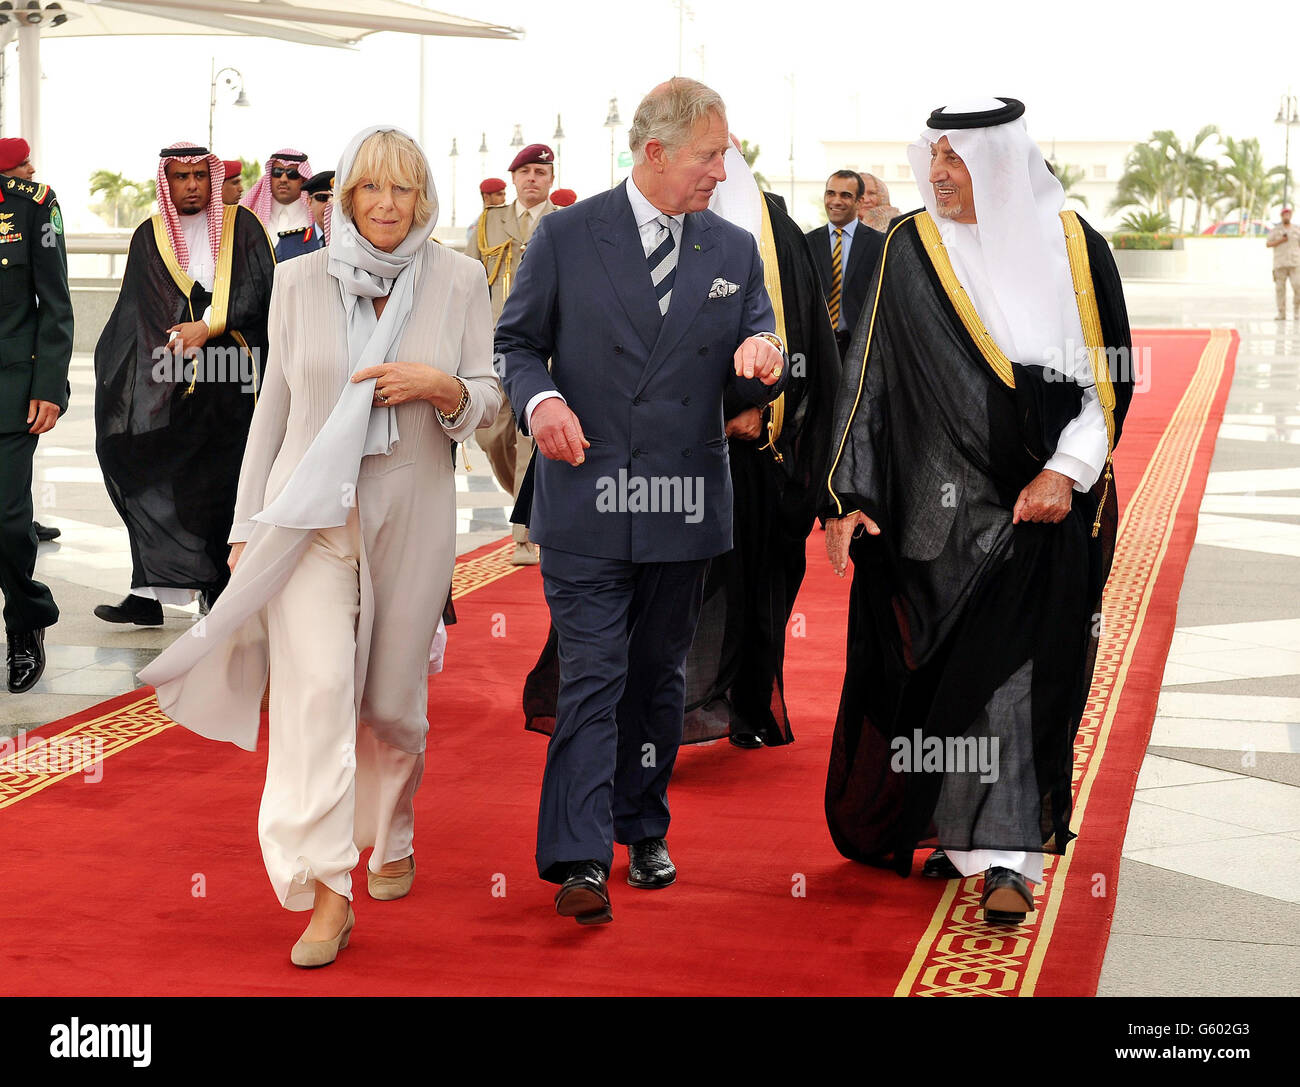 The Prince of Wales and Duchess of Cornwall are meet at Jeddah Airport by the Governor of Makkah Prince Khalid al Faisal (right), after arriving by plane from Riyadh to the Red Sea coastal city in Saudi Arabia. Stock Photo